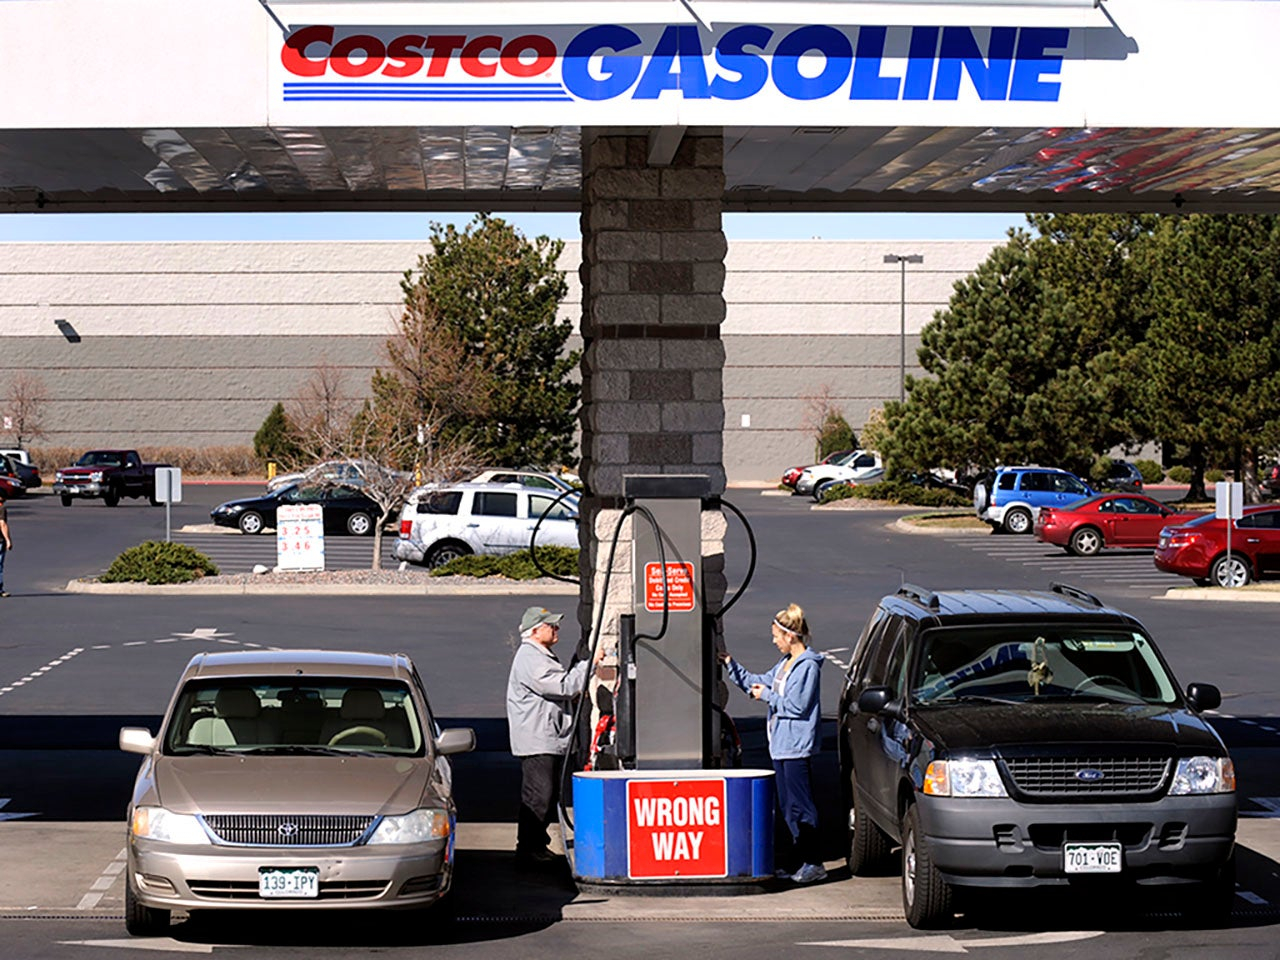 With Costco Visa Card Which Gas Stations Earn 4 Cash Back 